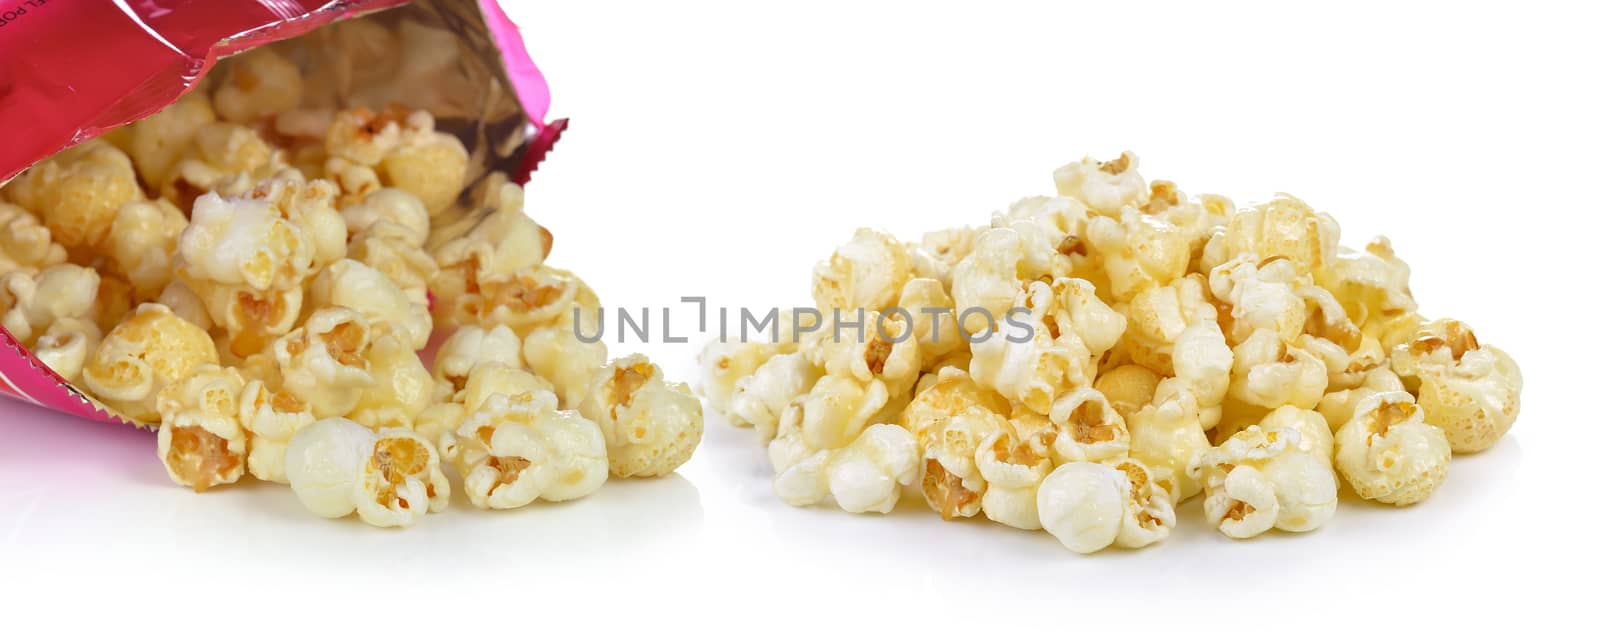 Popcorn bag on white background by sommai